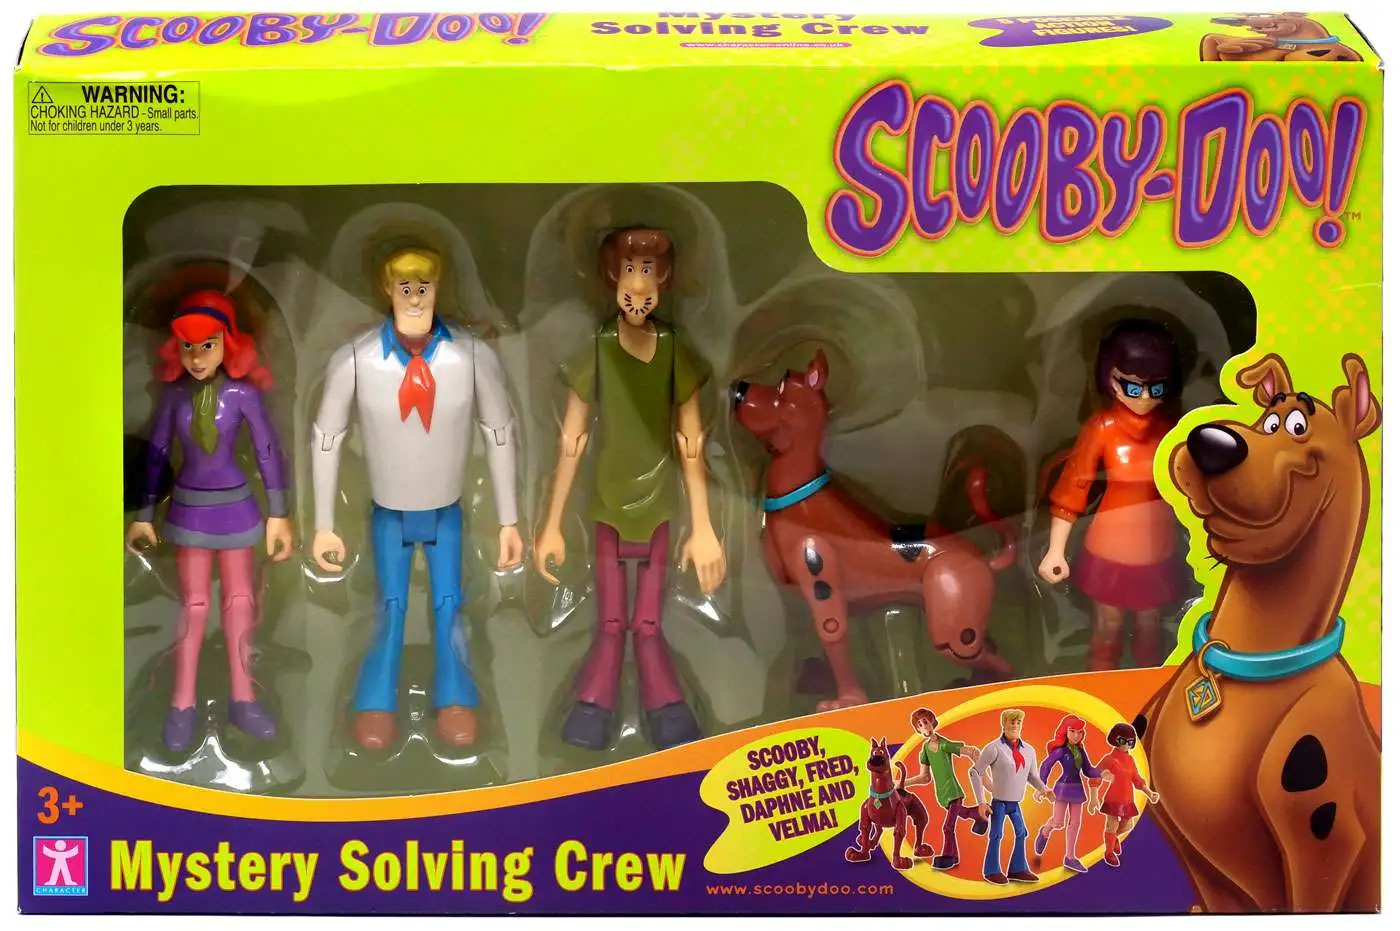 1st Mate Scooby & 1st Mate Velma Scooby Doo Pirate Crew Figure Twin Pack 